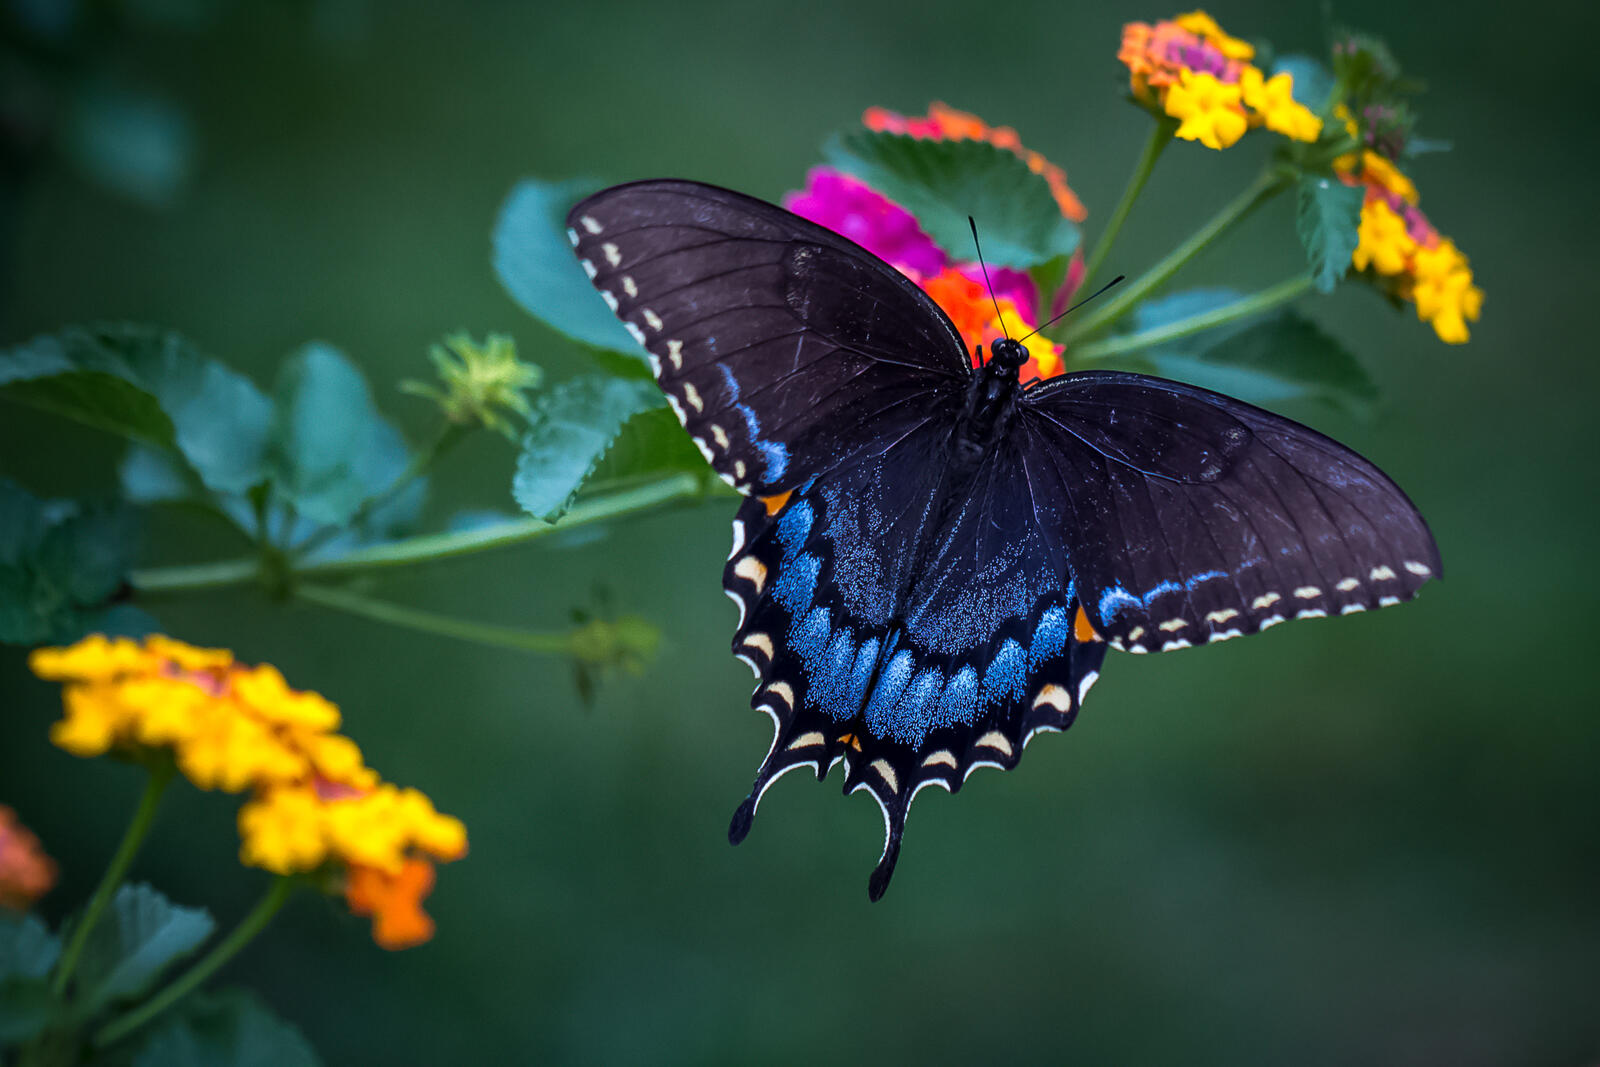 Wallpapers insects butterfly wildflowers on the desktop